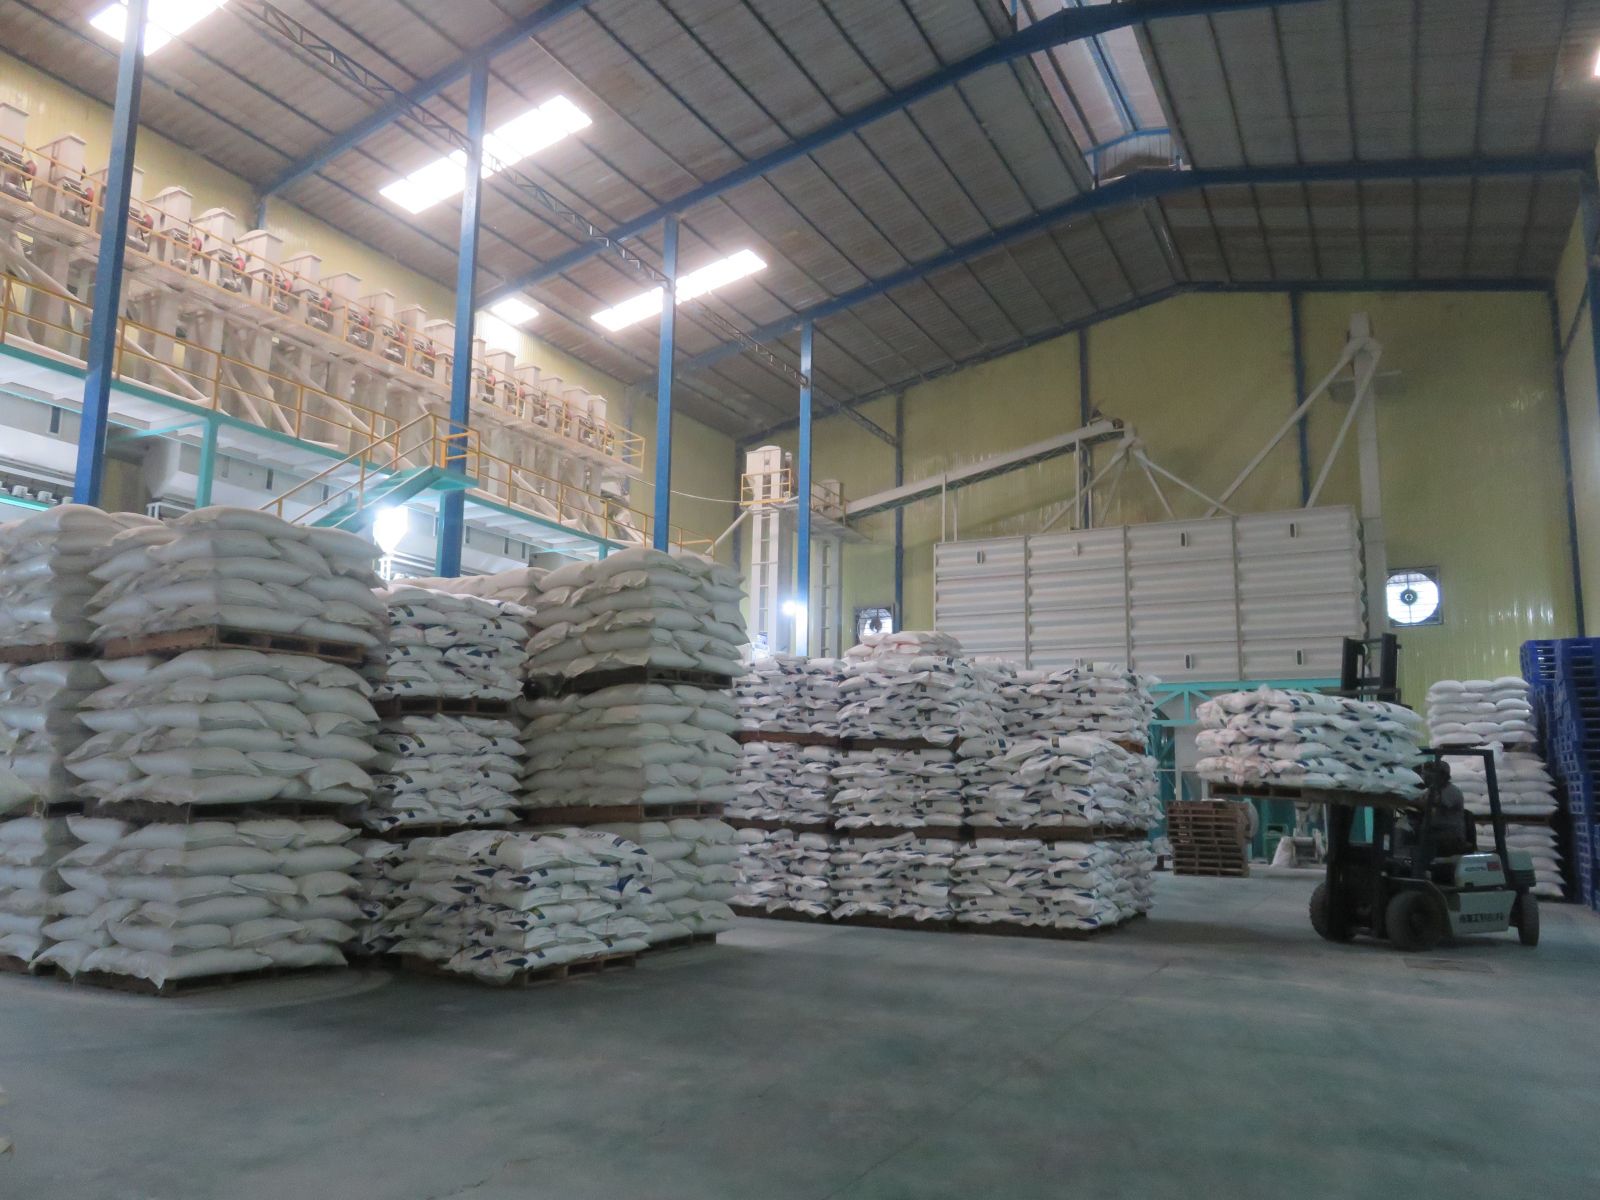 In Long An, the inventory of traders having warehouses in the area is about 56,000 tons of glutinous rice